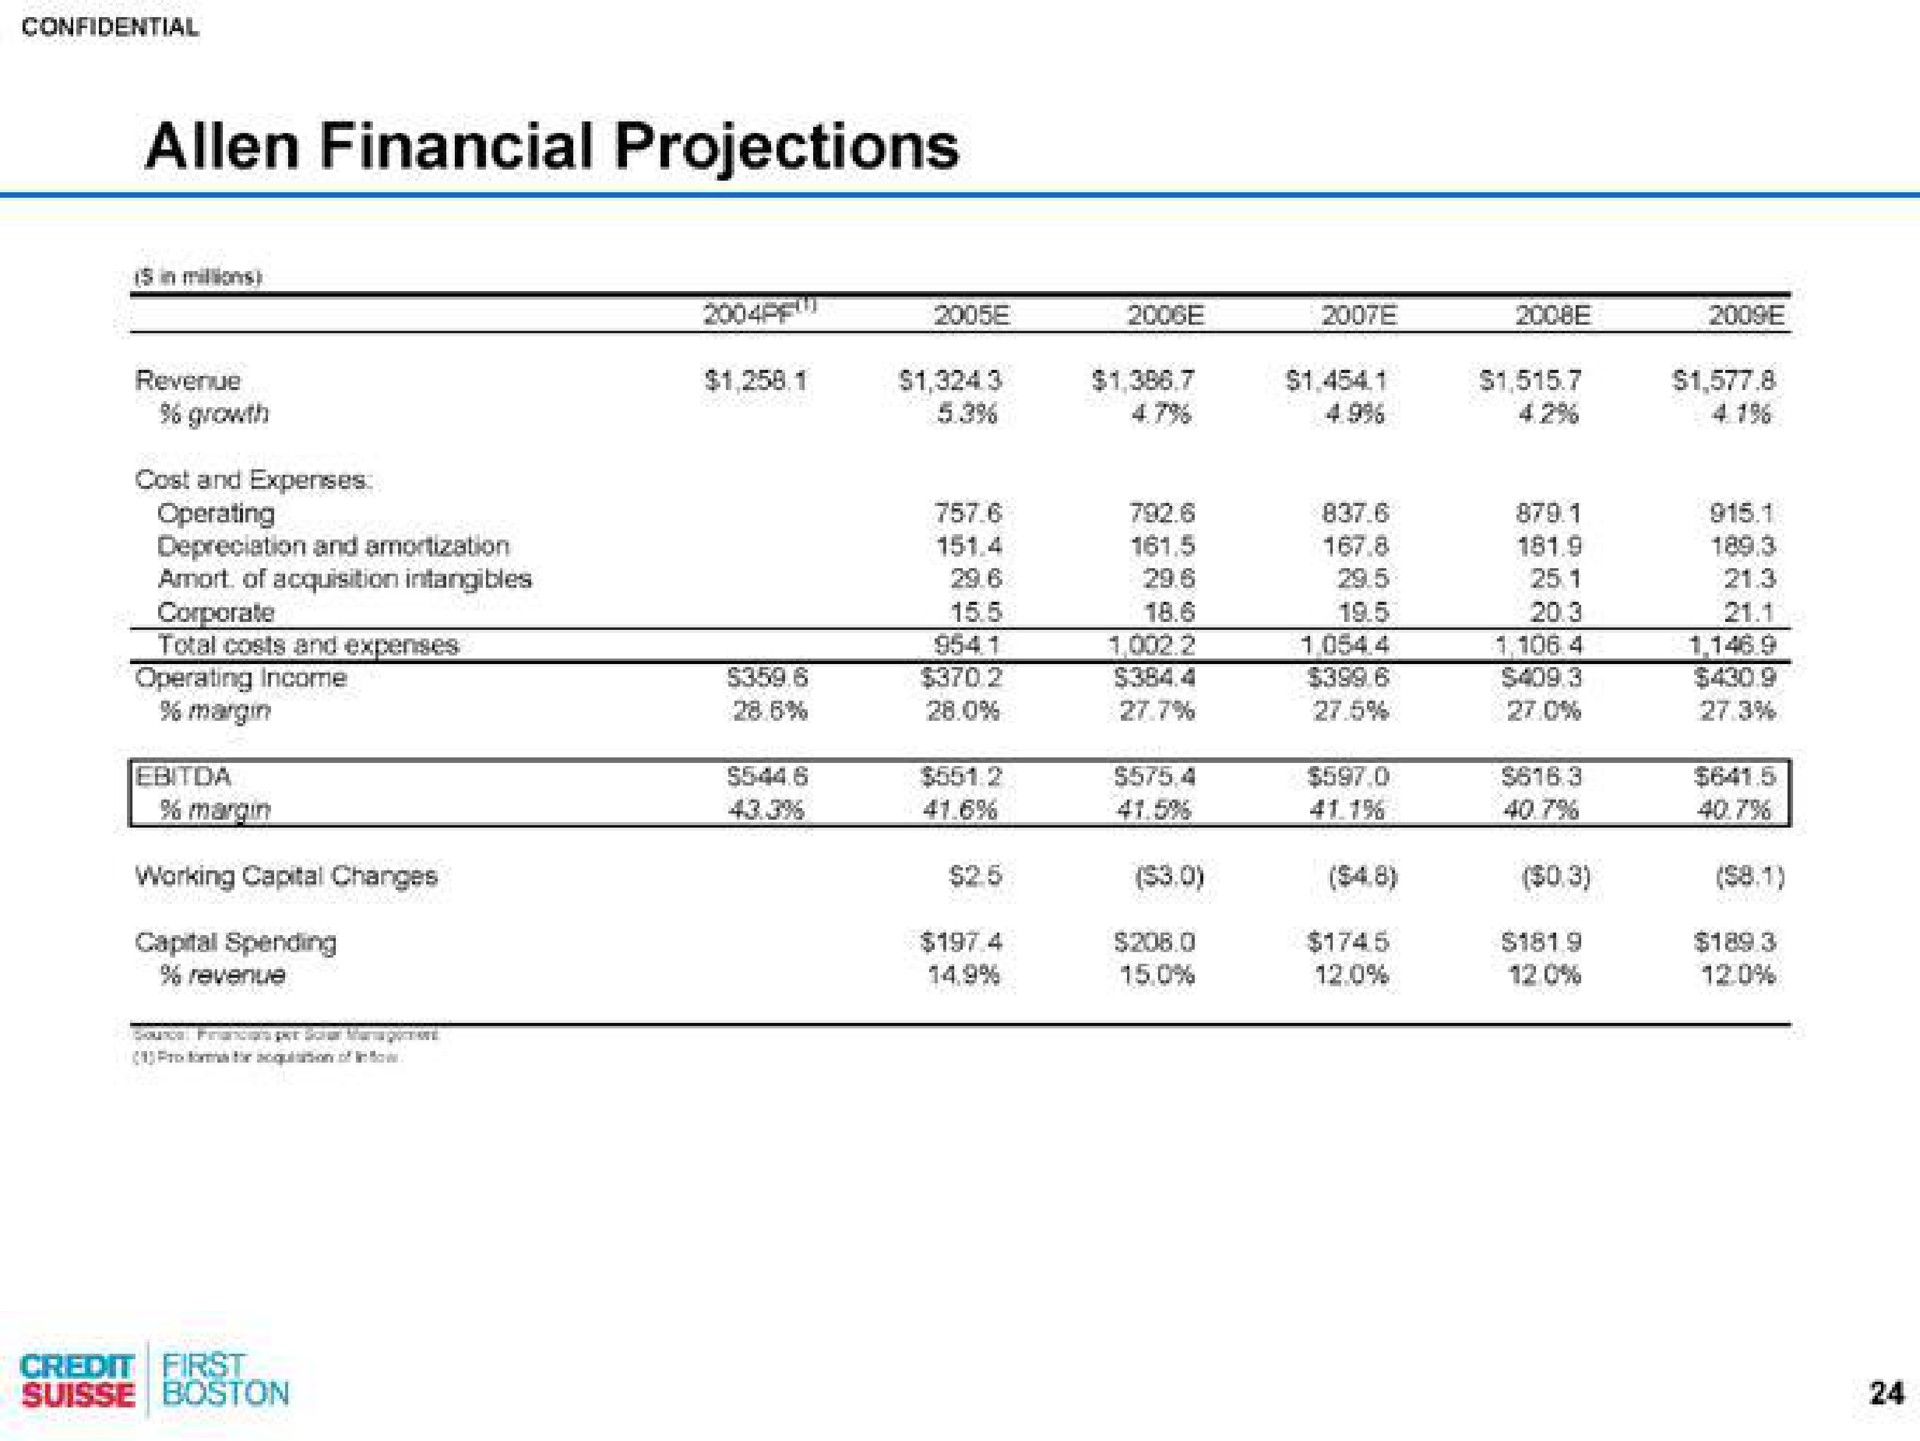 financial projections | Credit Suisse